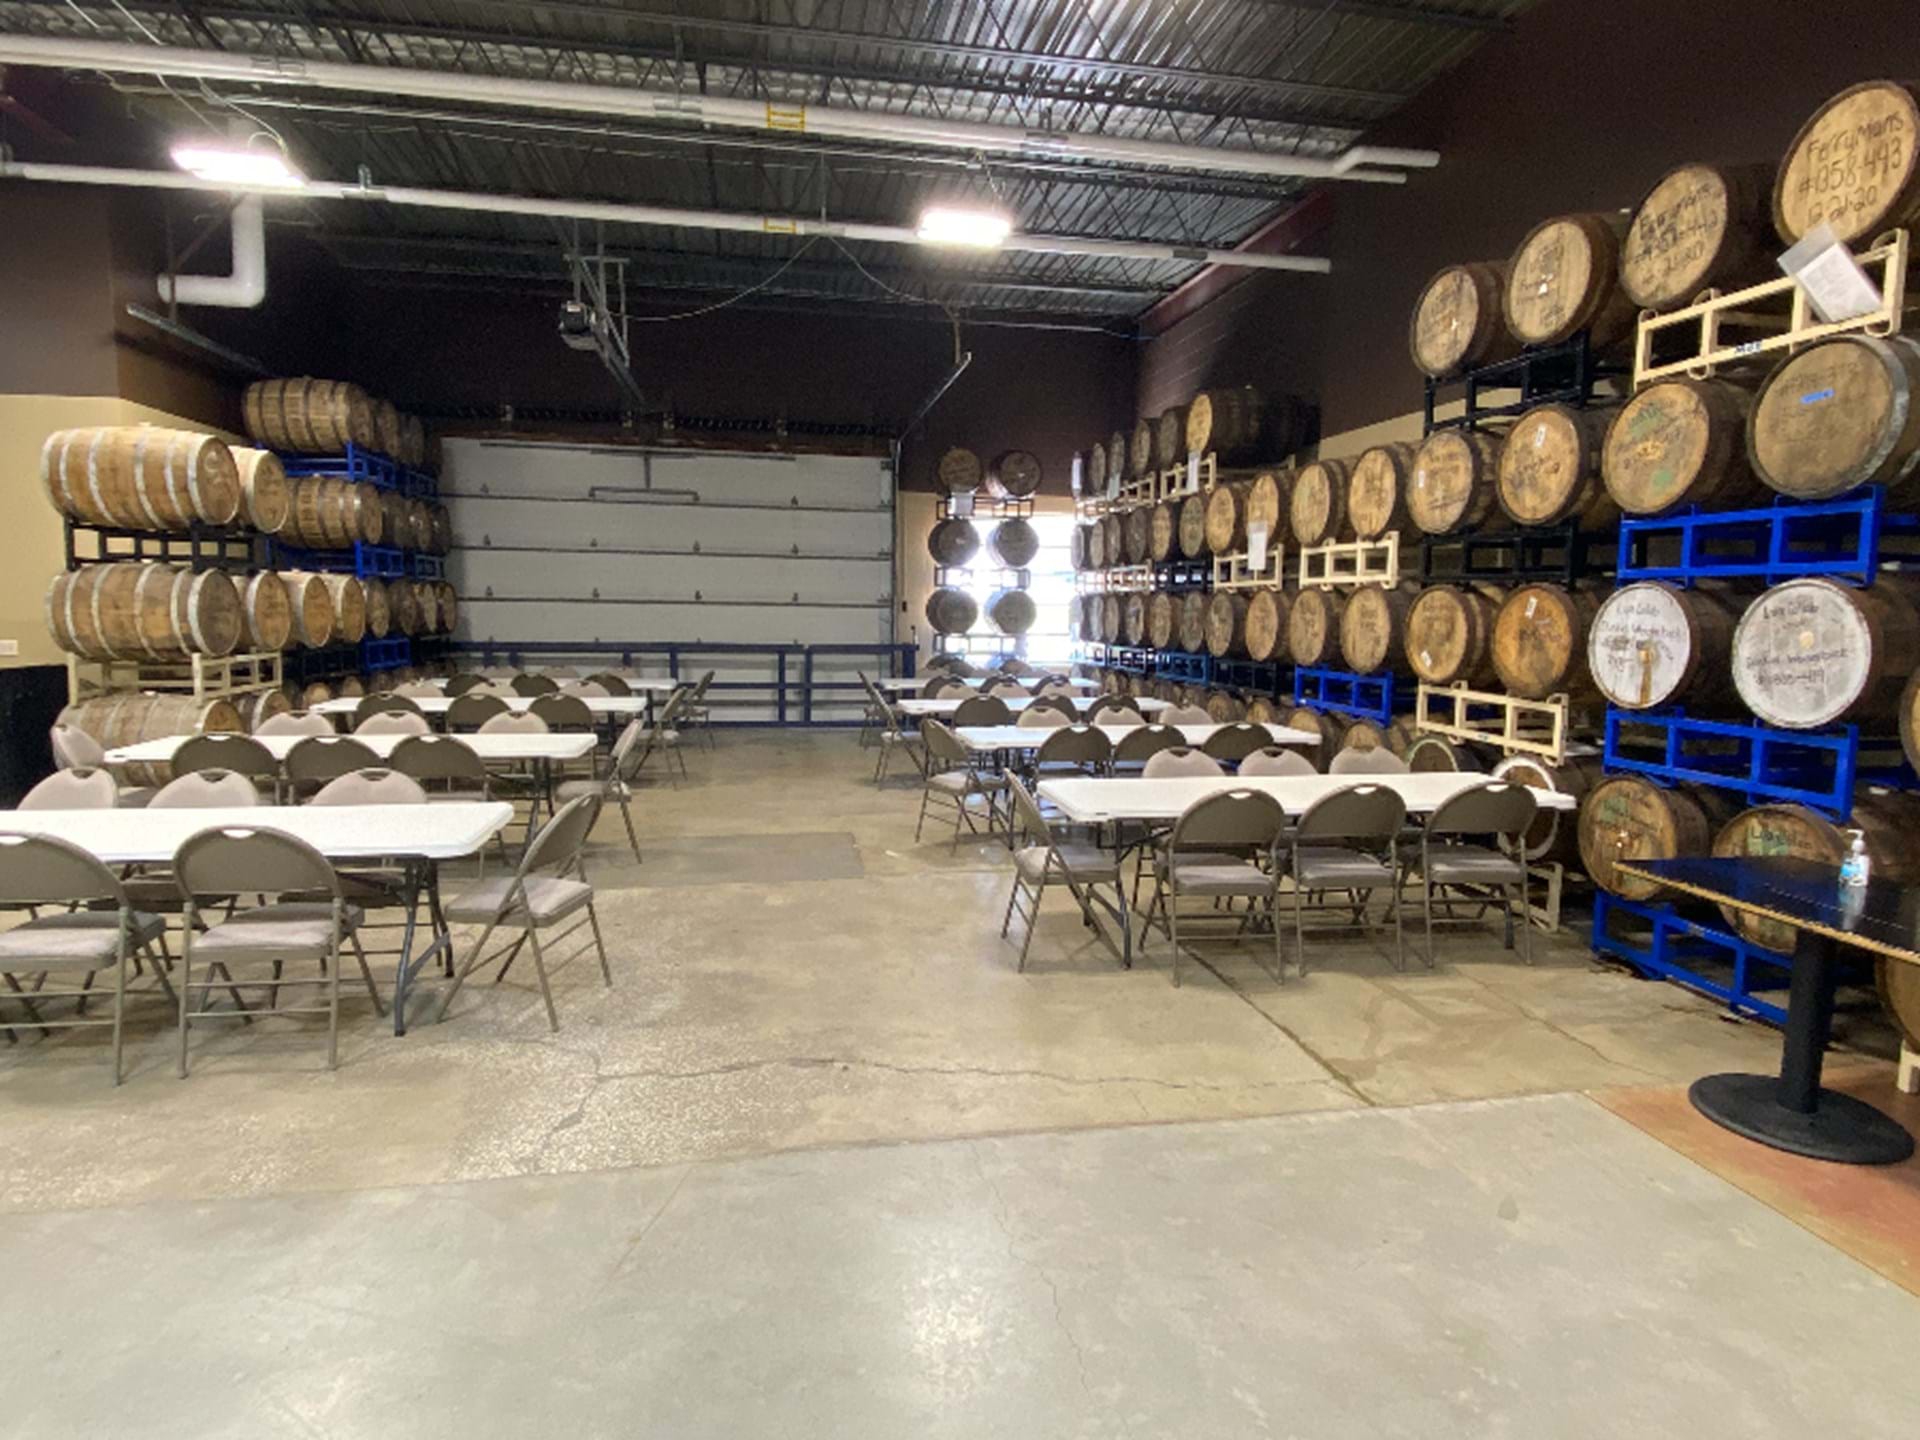 Our Barrel Room is available for private events!